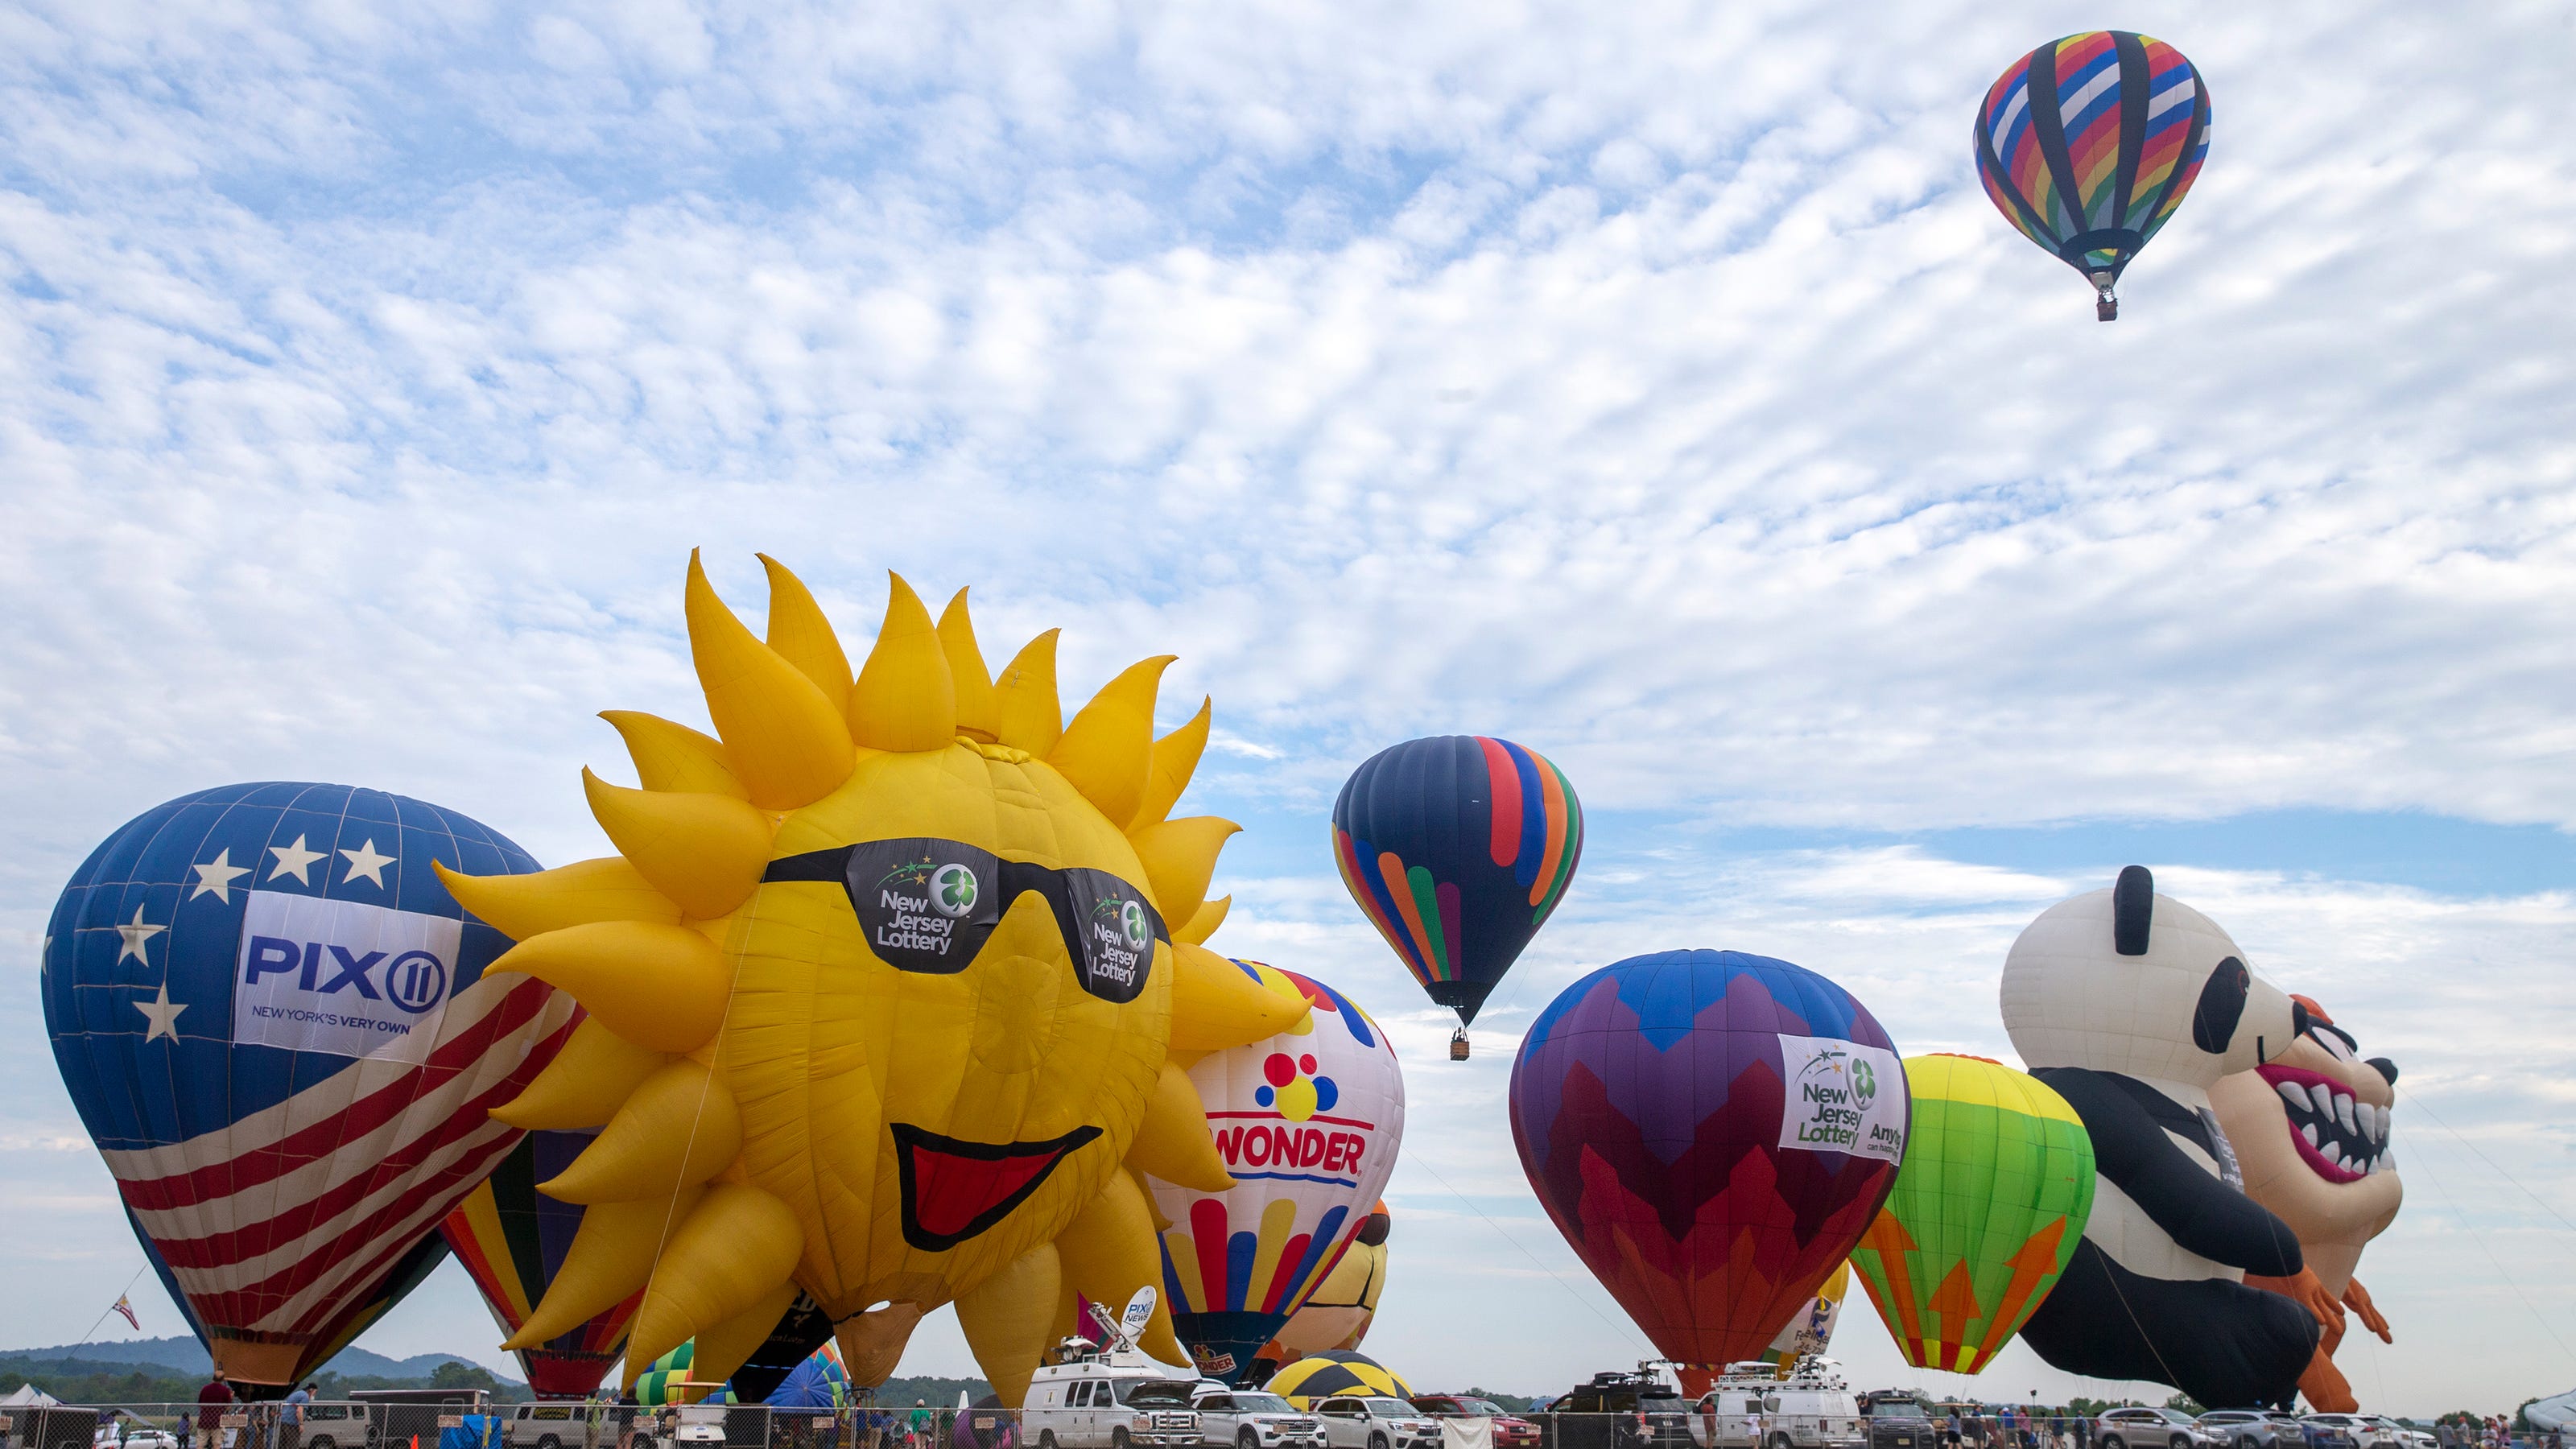 Sneak preview of the 39th annual New Jersey Lottery Festival of Ballooning